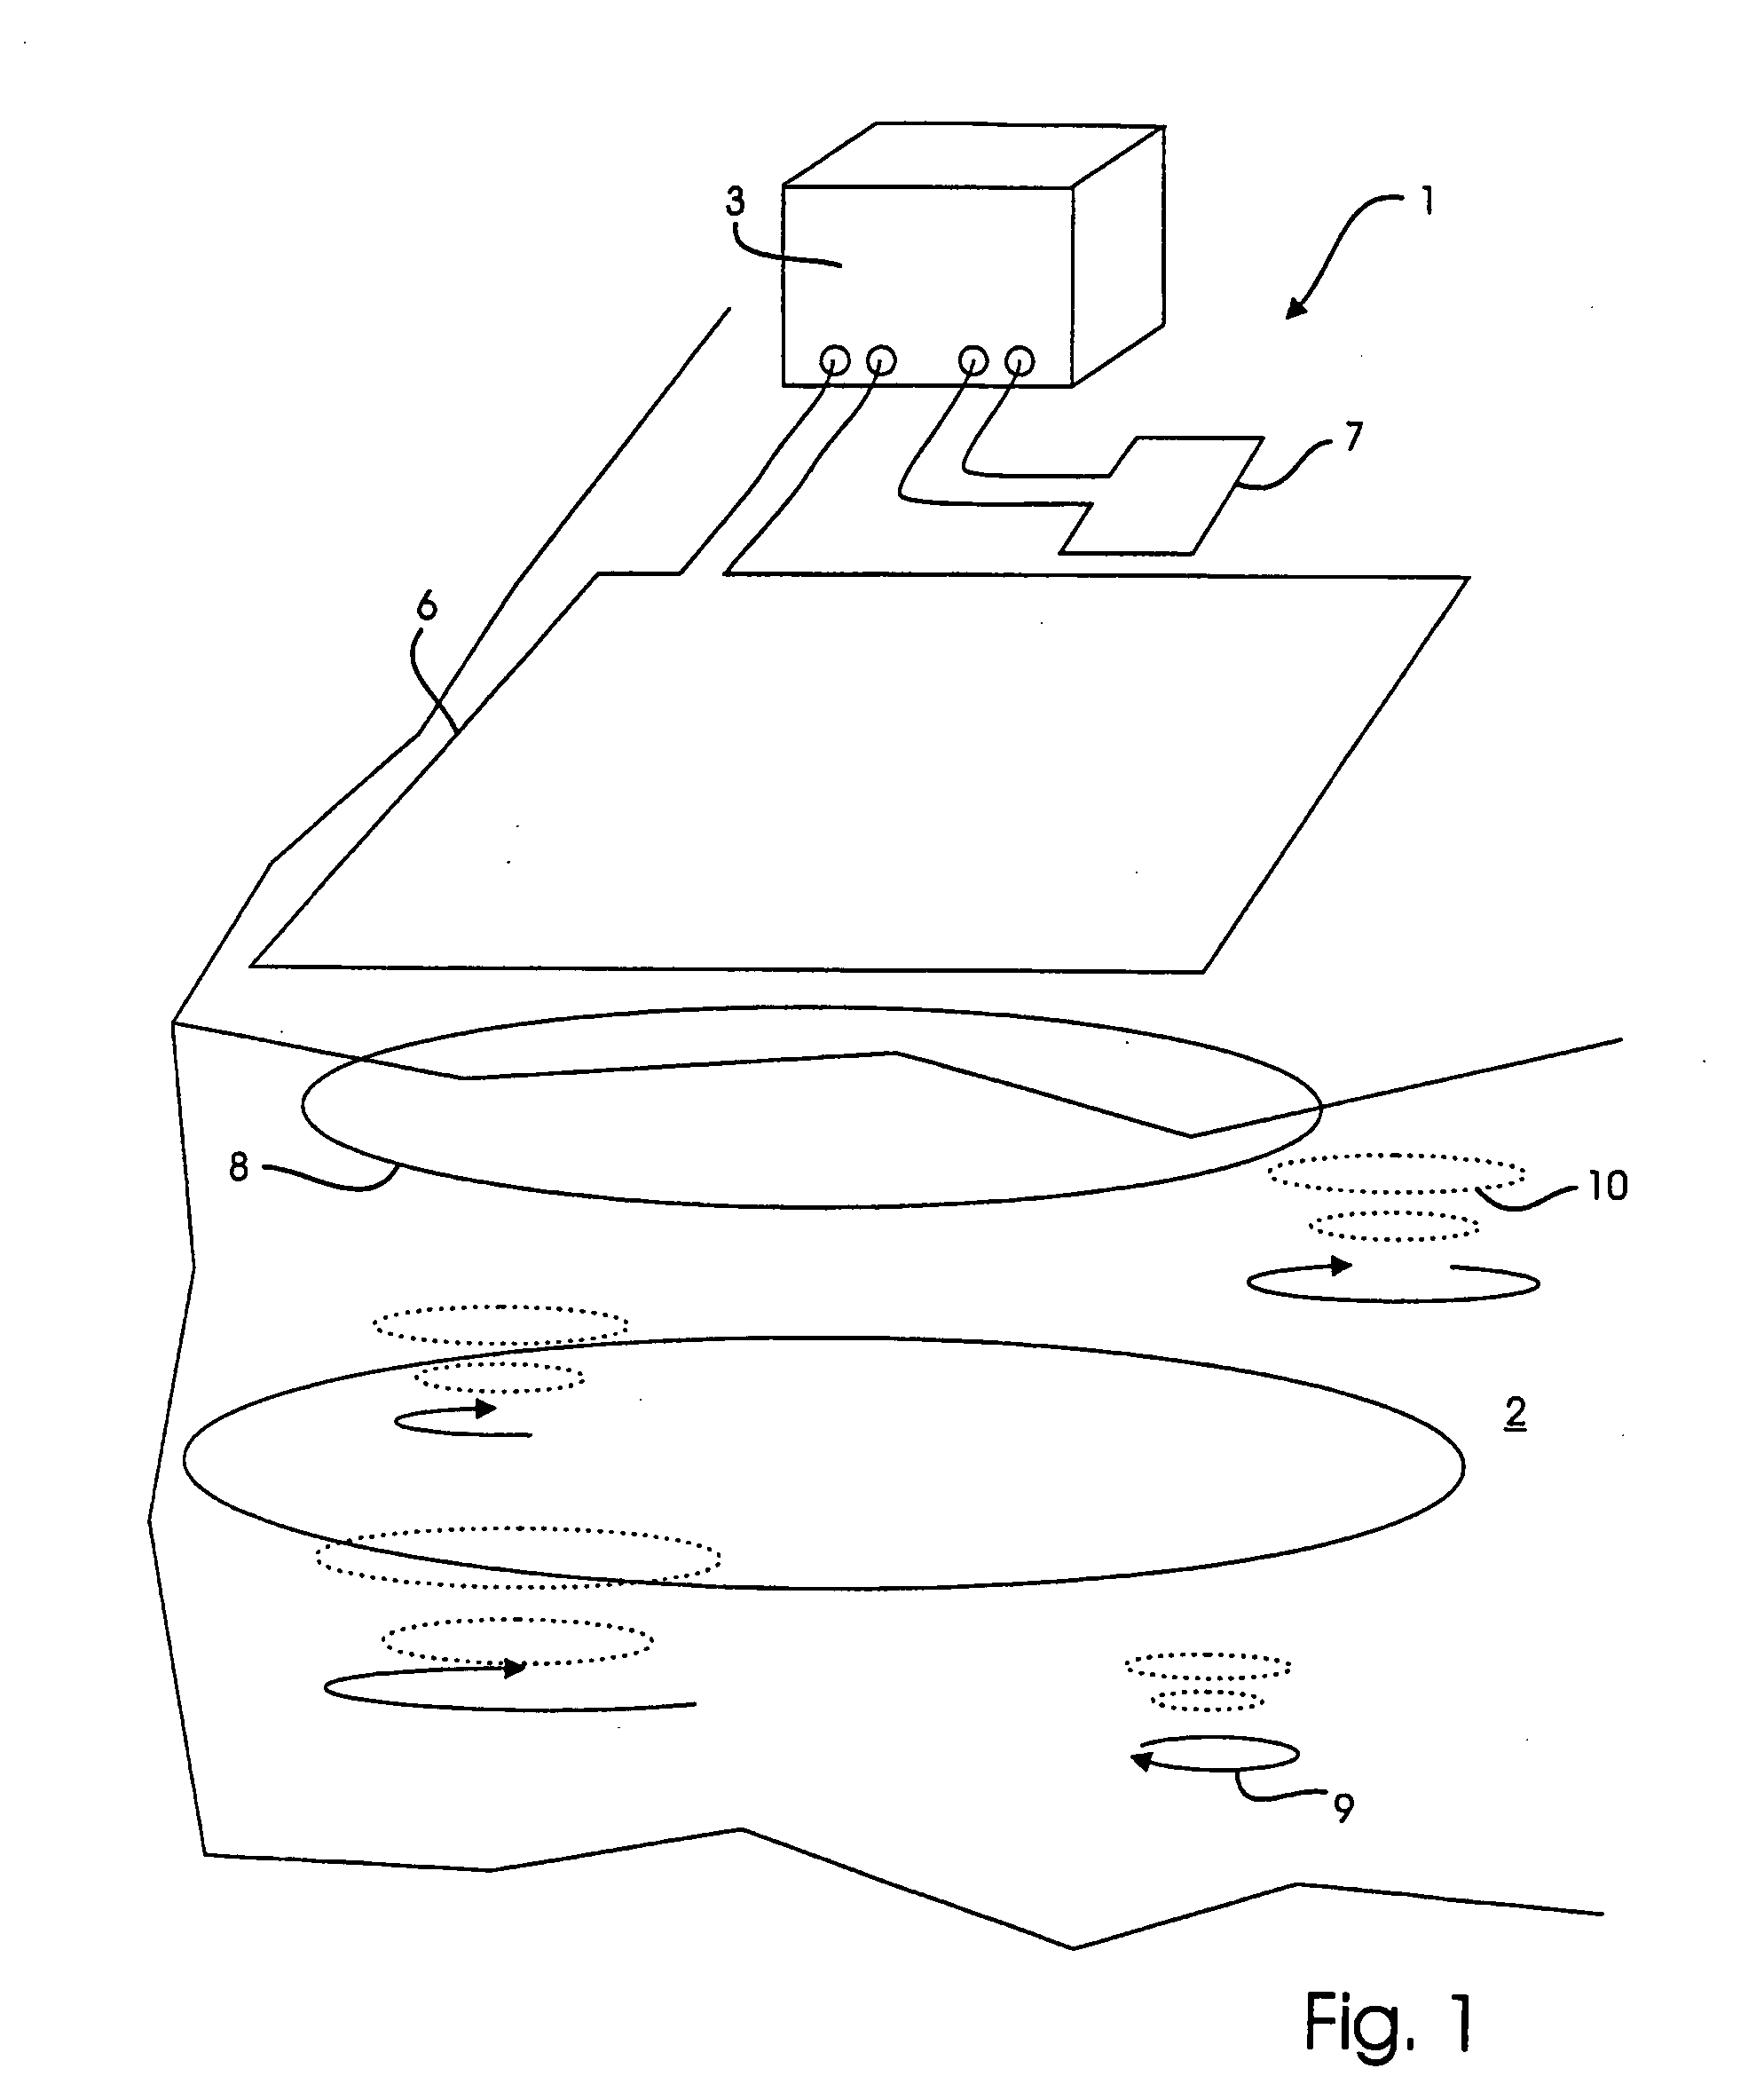 Measuring equipment and method for mapping the geology in an underground formation